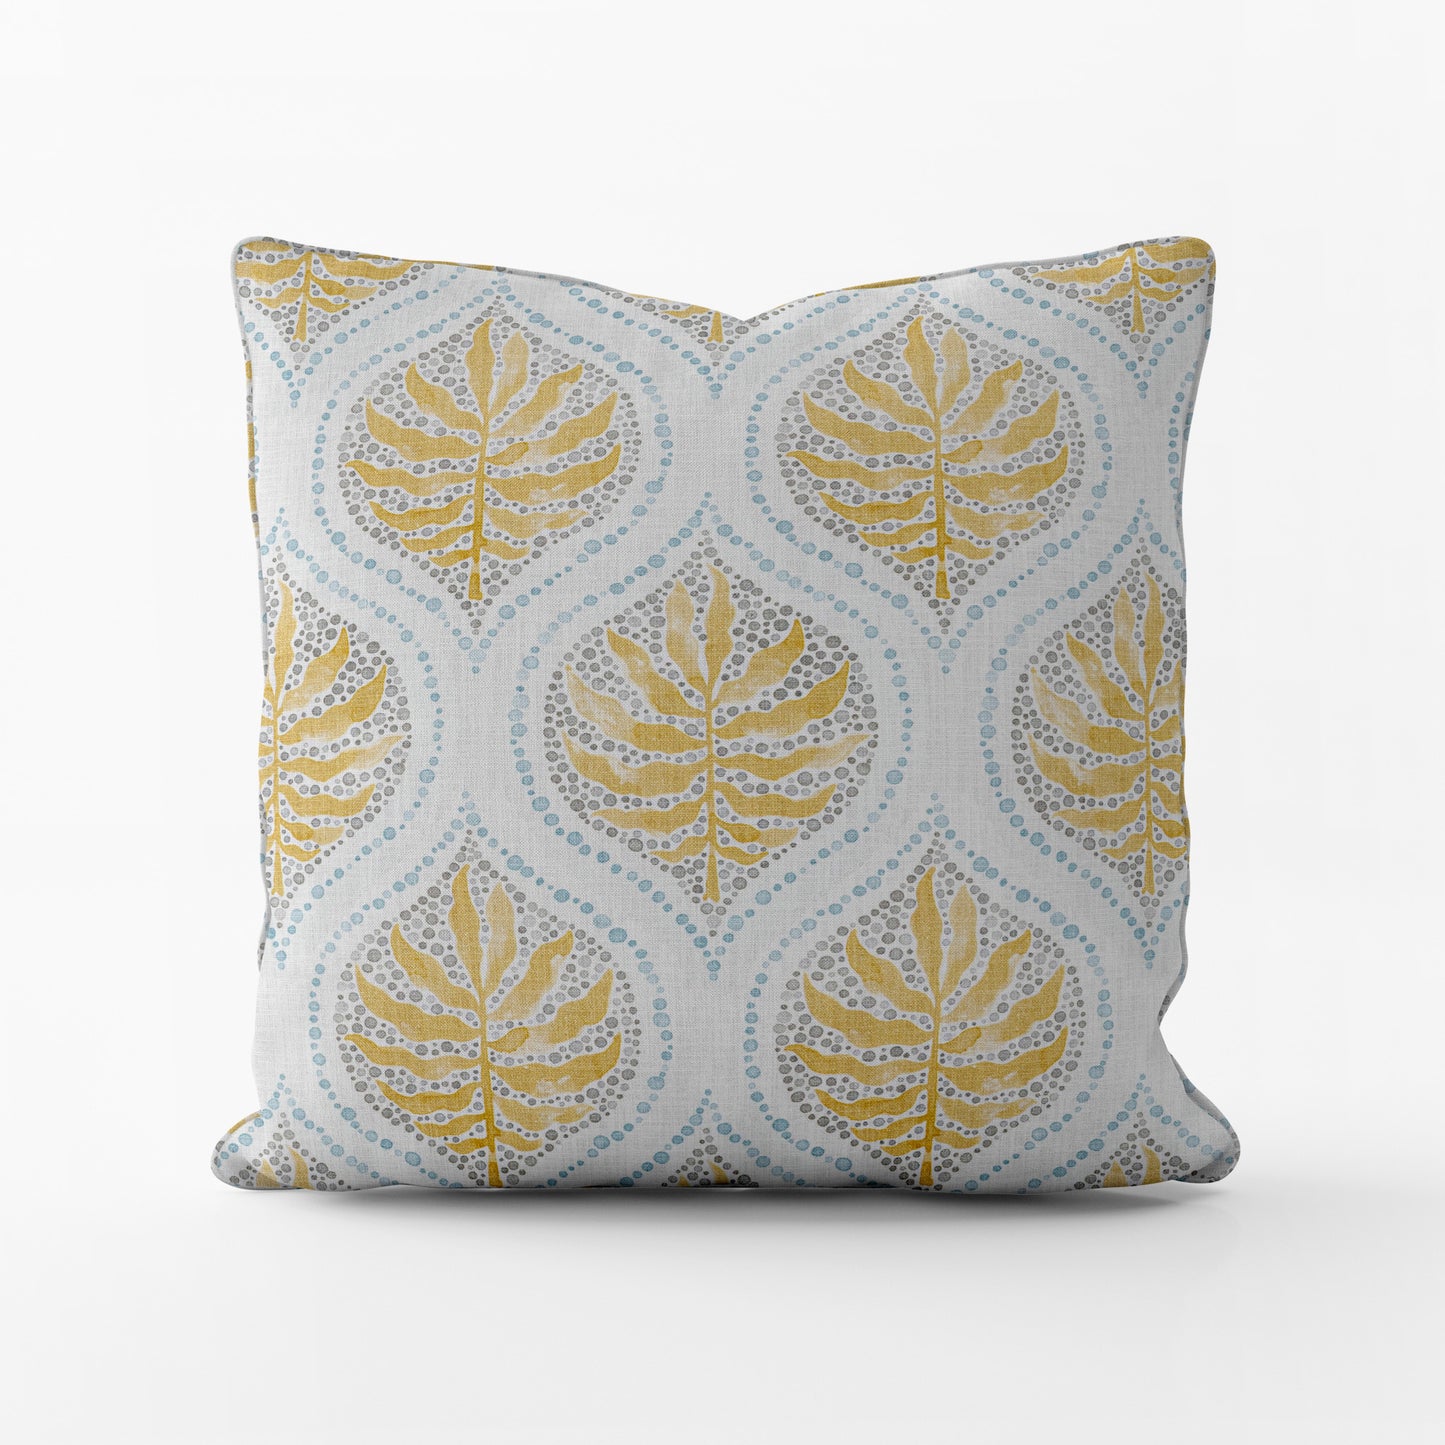 Decorative Pillows in Airlie Amber Ogee Floral Watercolor- Gold, Gray, Blue